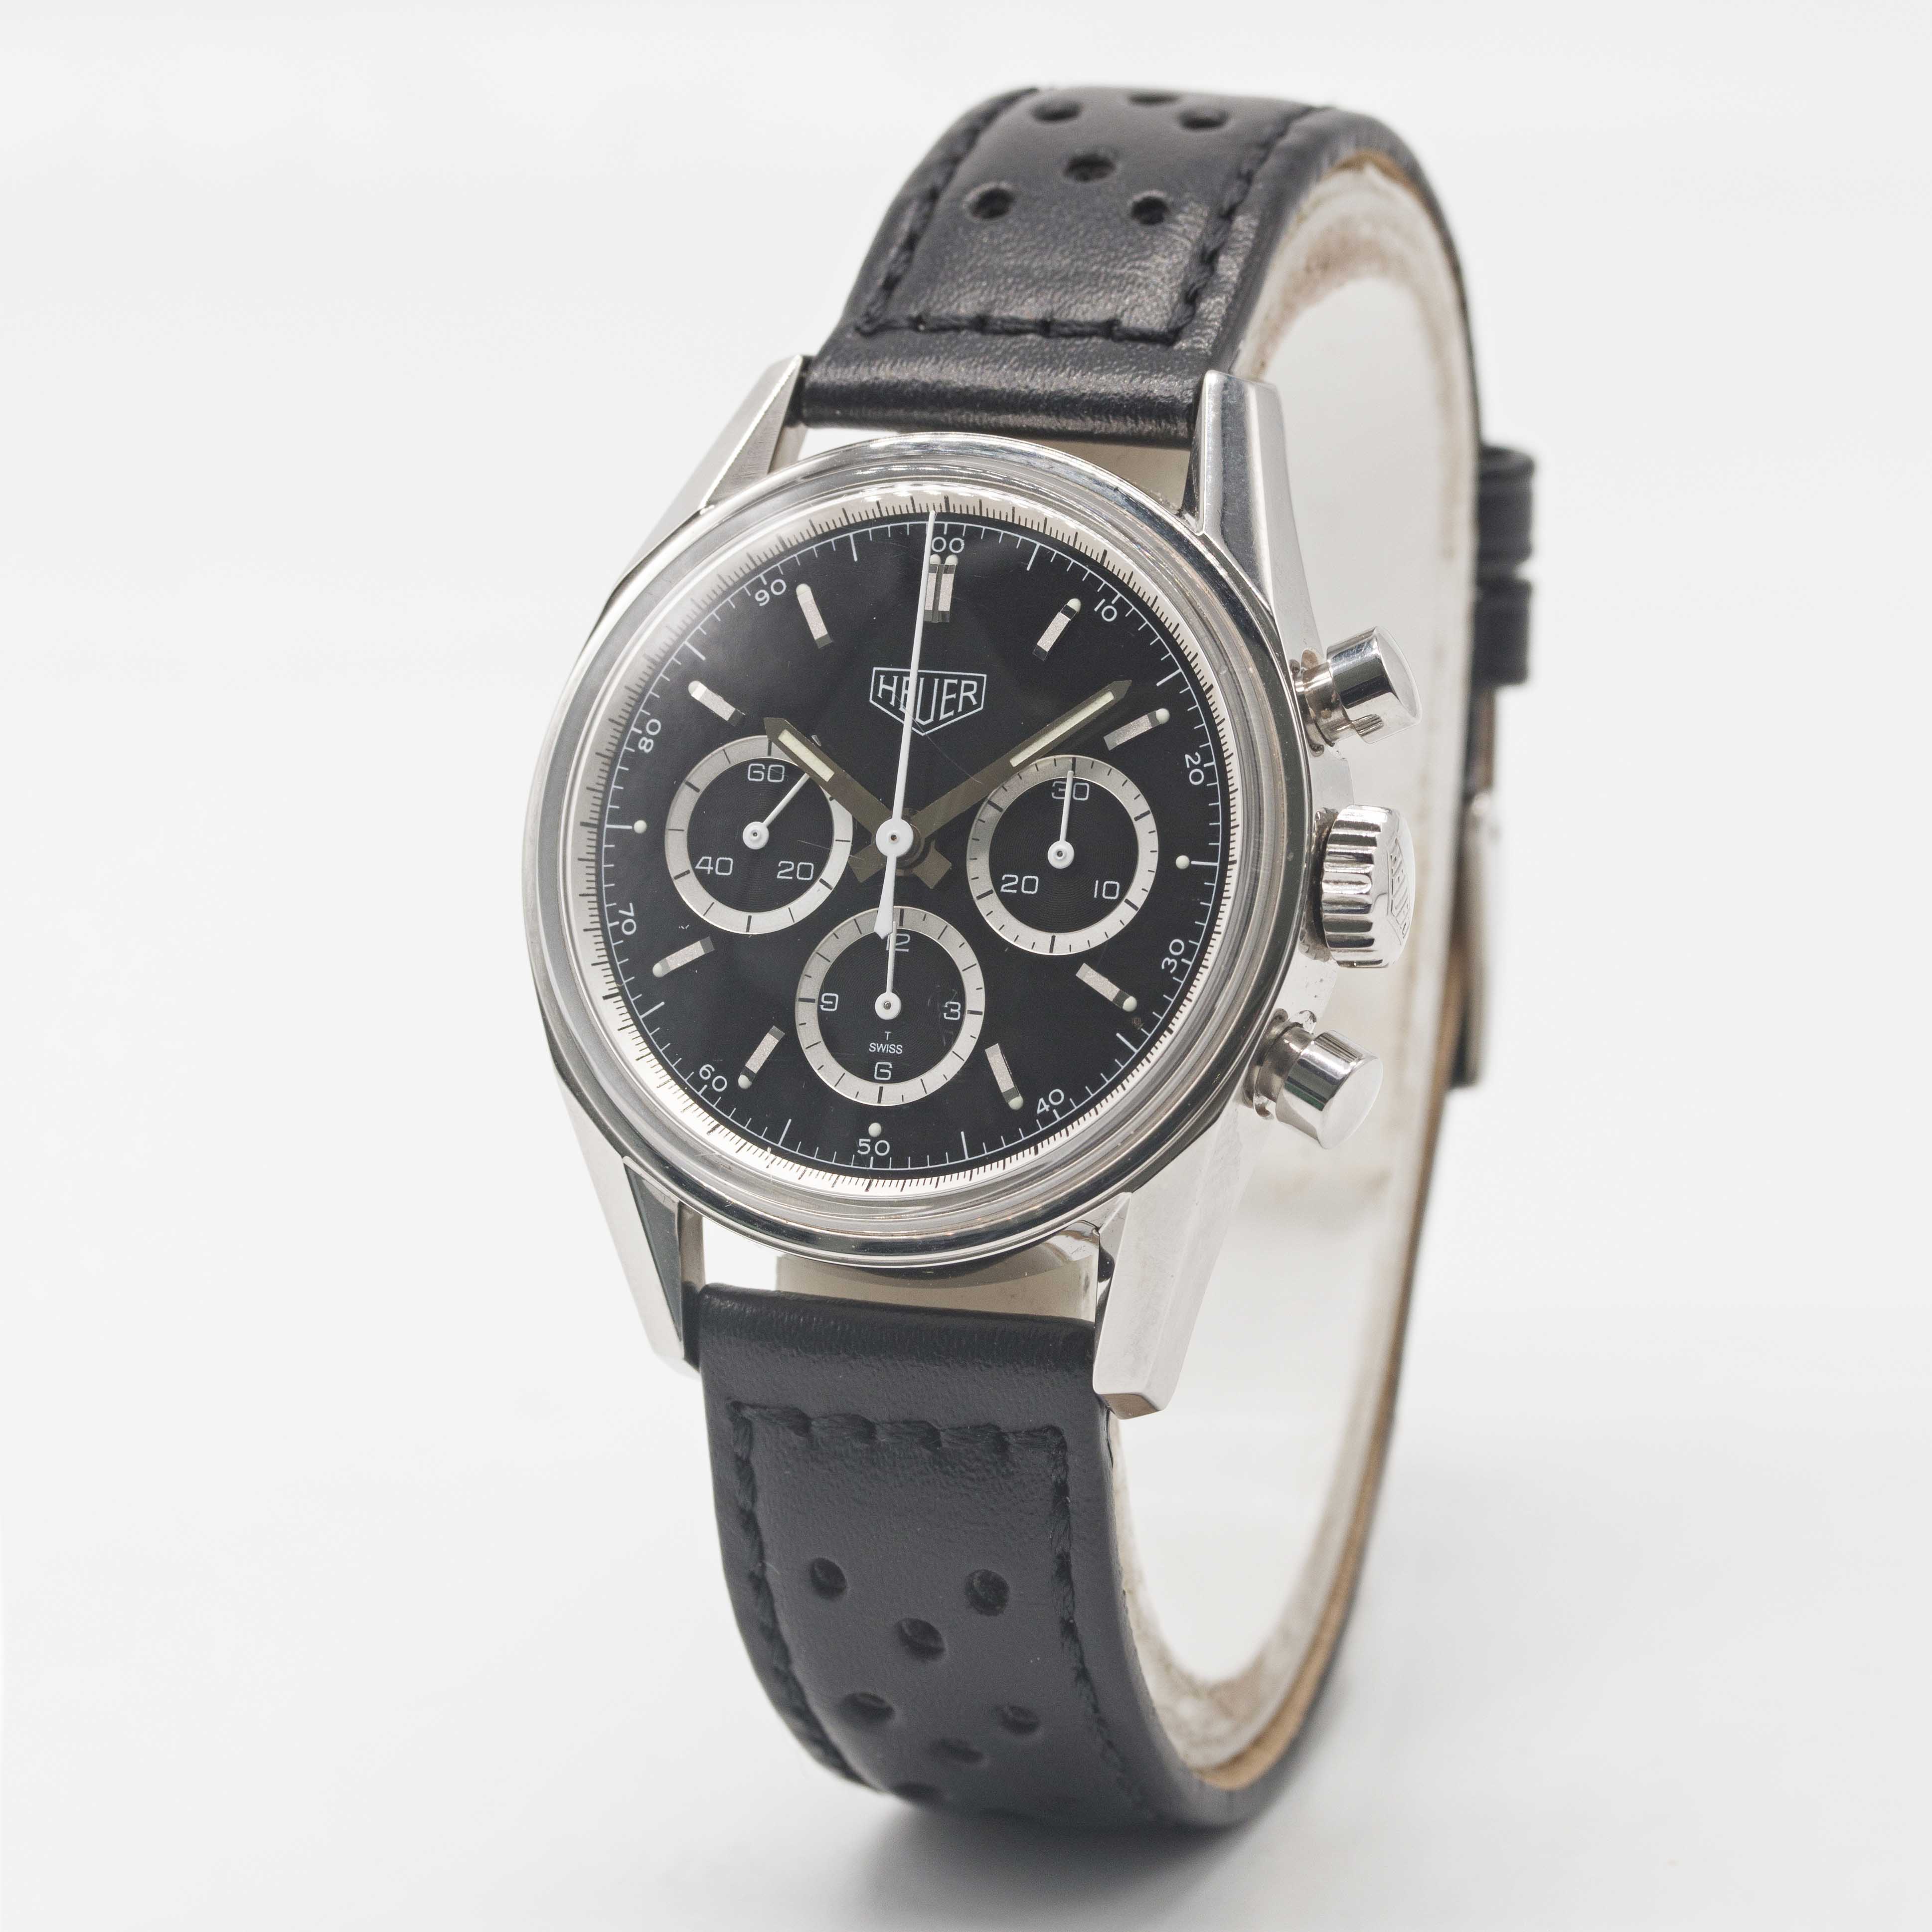 A GENTLEMAN'S STAINLESS STEEL HEUER CLASSIC CARRERA CHRONOGRAPH WRIST WATCH DATED 2000, REF. - Image 3 of 7